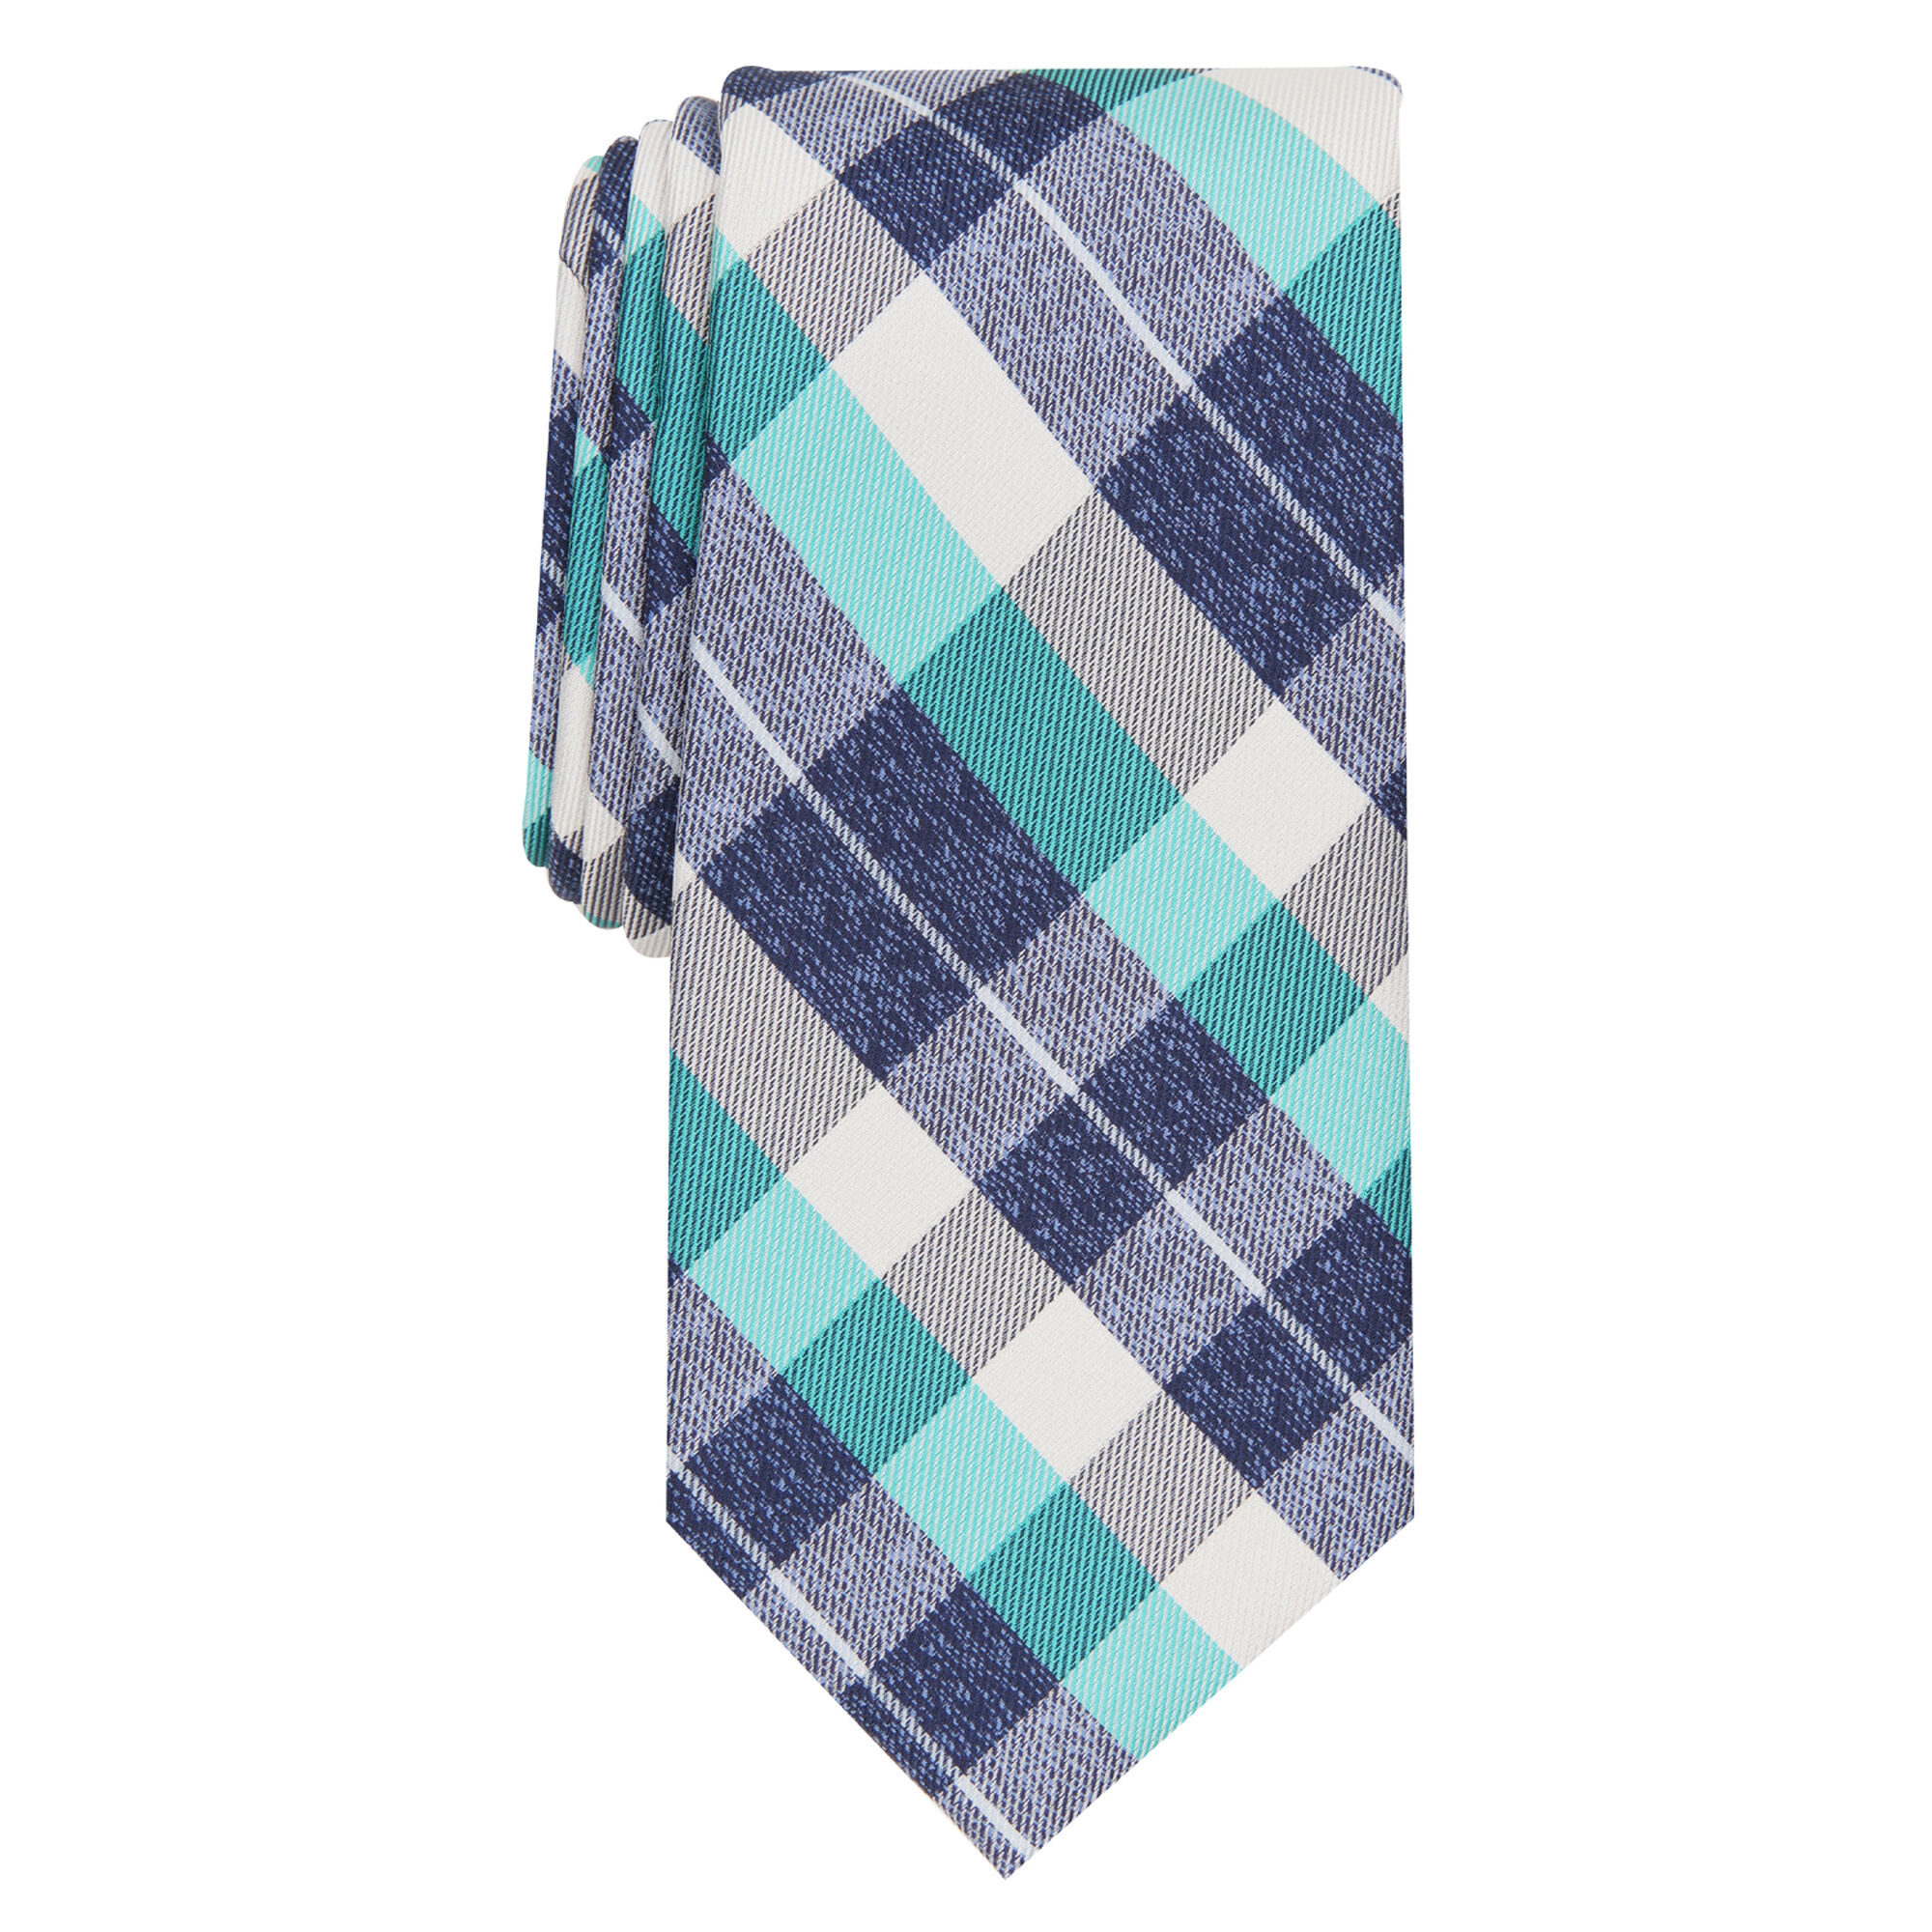 Haggar Andres Plaid Tie Turquoise (2RC0-1004) photo